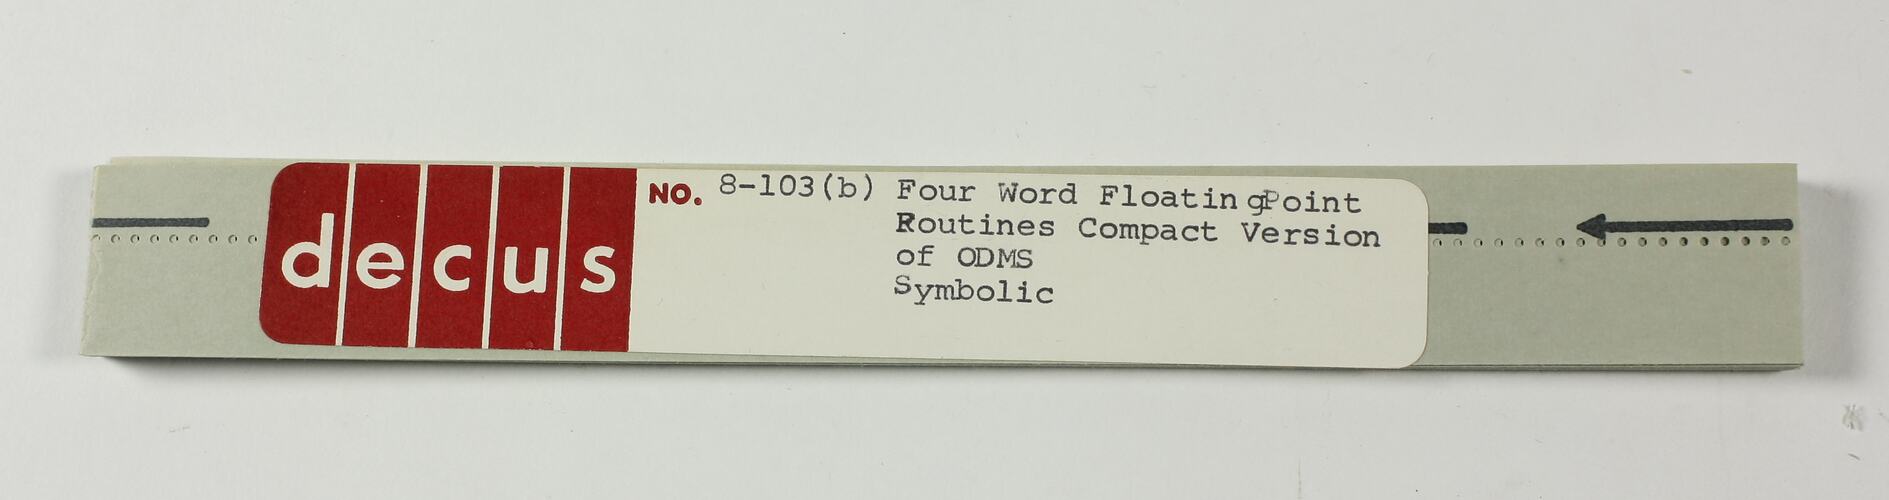 Paper Tape - DECUS, '8-103b Four Word Floating Point Routines, Compact Version of ODMS, Symbolic'